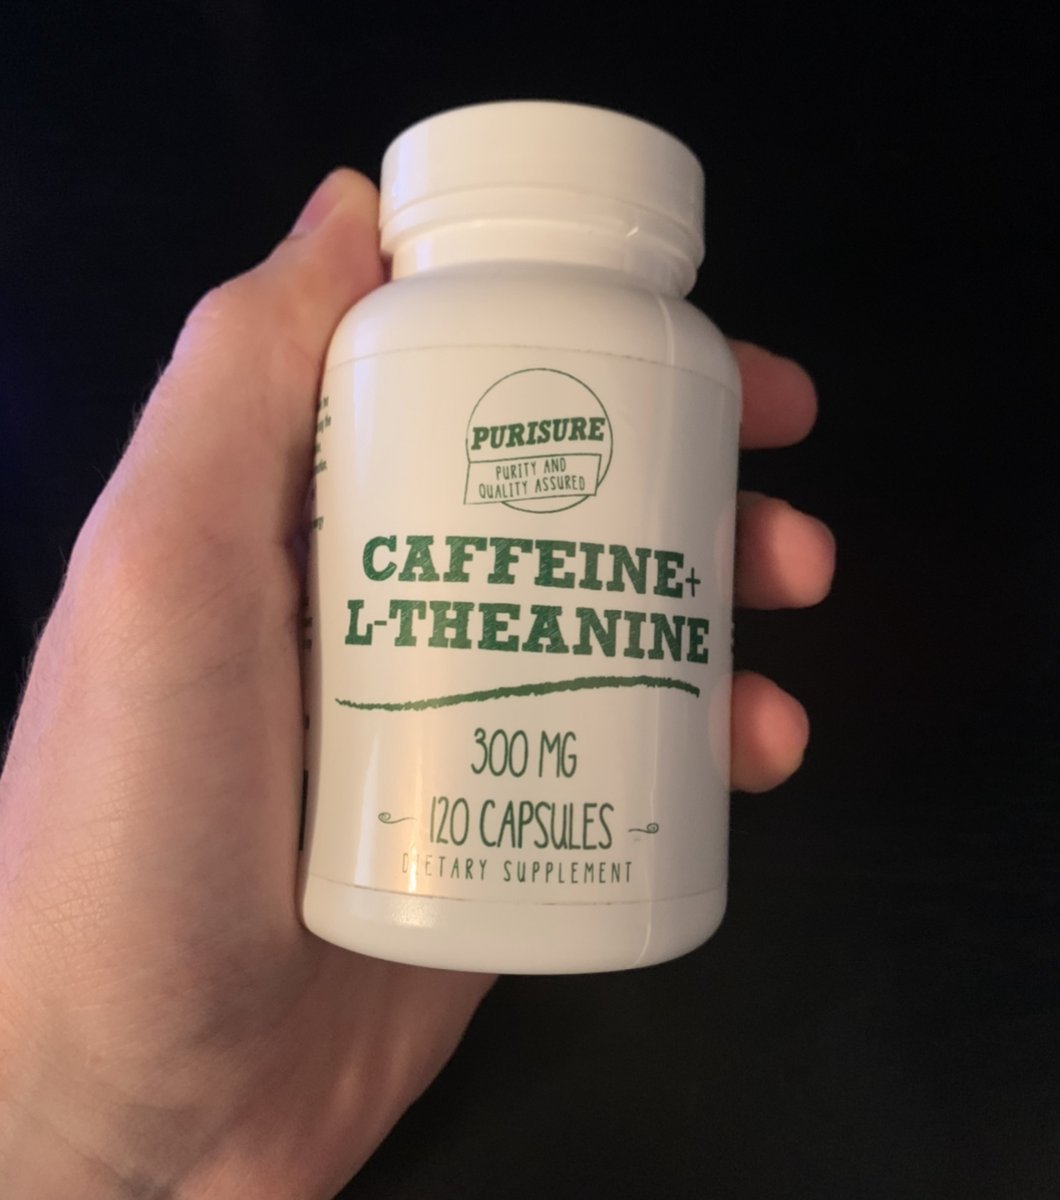 #6: Utilize CaffeineCaffeine can be a powerful appetite suppressor. Just ask  @Gabepluguez about this one. He took advantage of caffeine's powerful effects to help him lose 23lbs in 12 weeks.